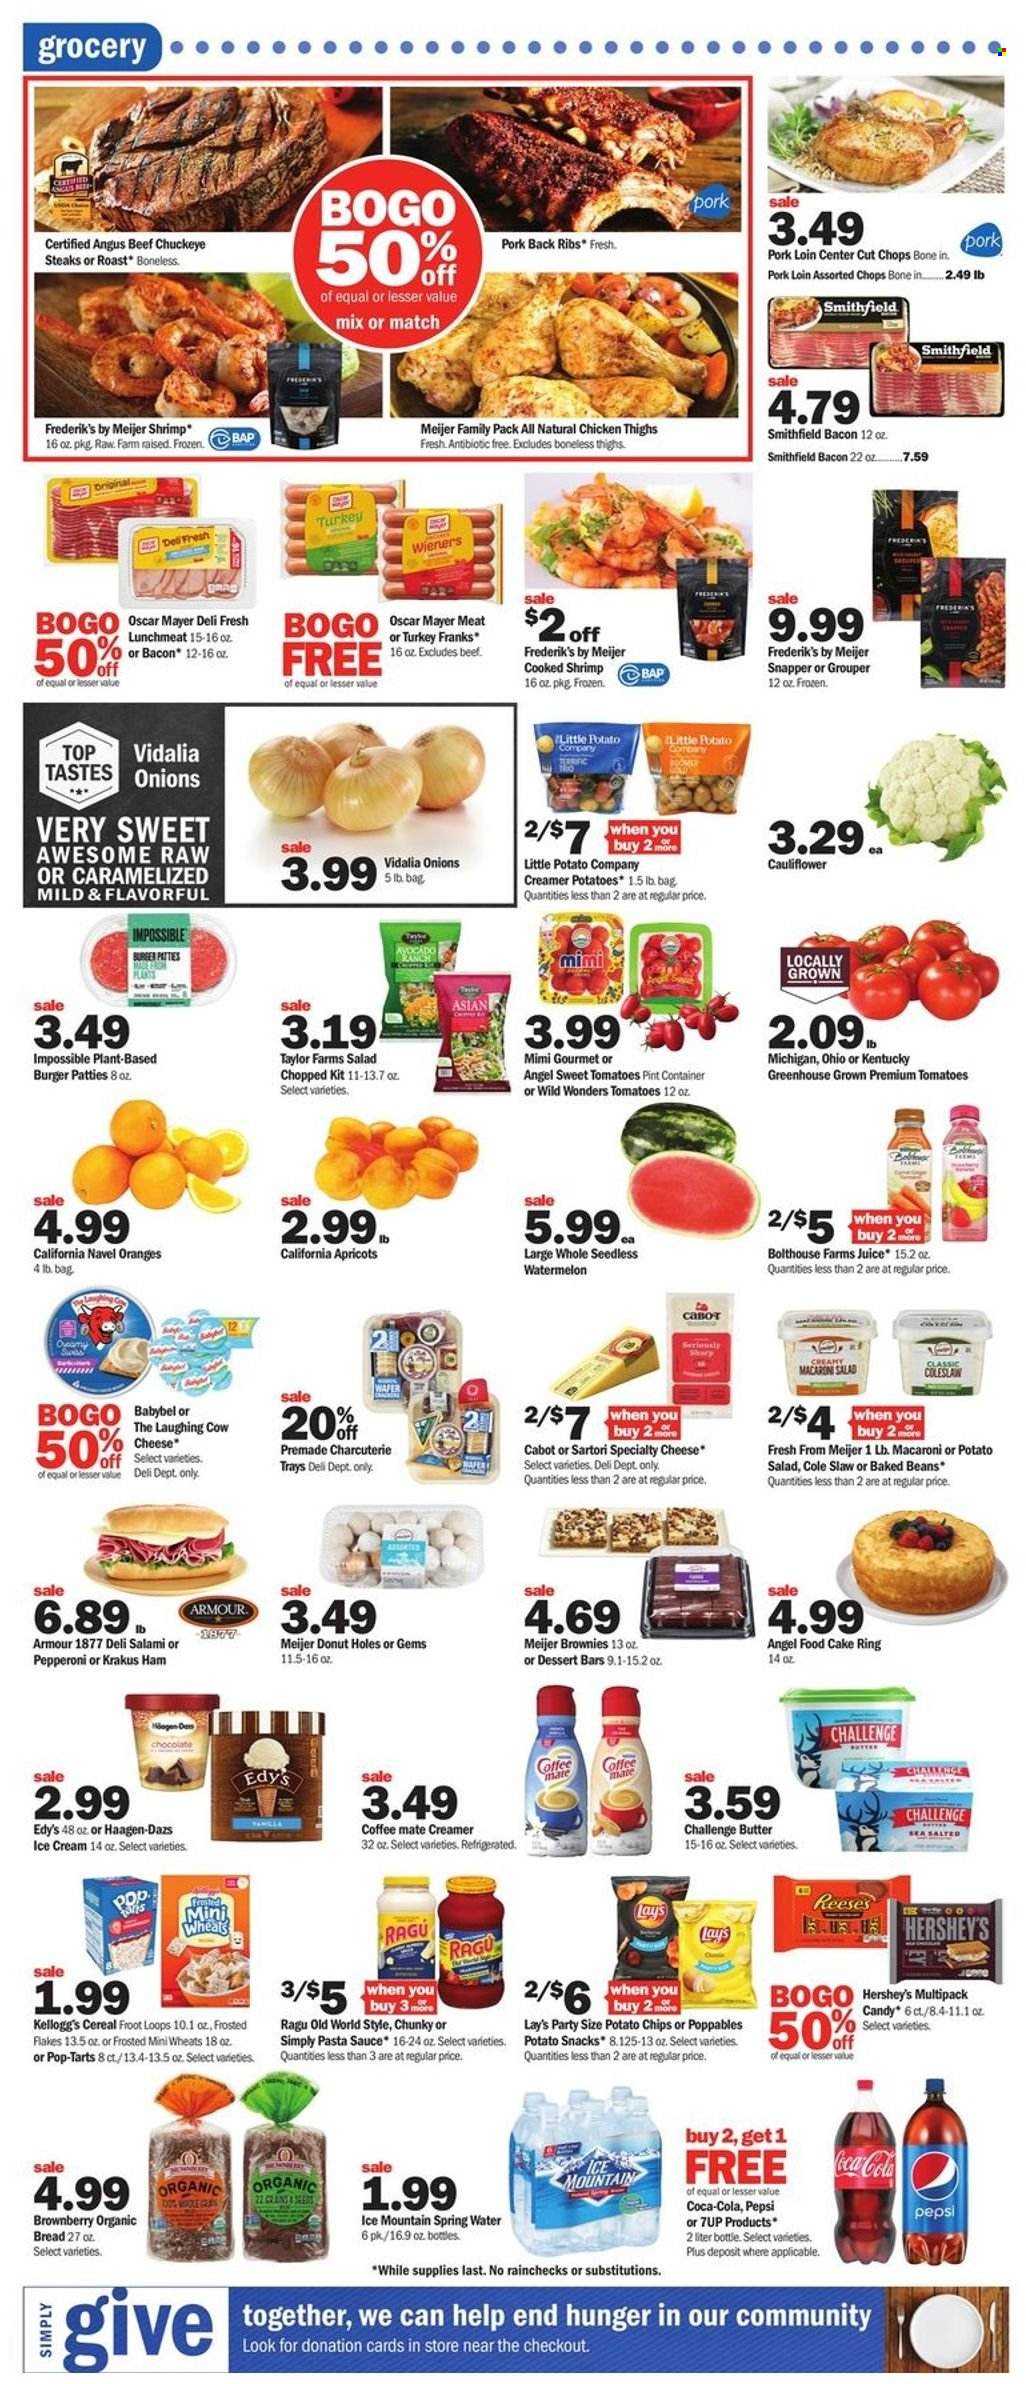 thumbnail - Meijer Flyer - 05/15/2022 - 05/21/2022 - Sales products - bread, cake, donut holes, brownies, Angel Food, tomatoes, onion, watermelon, oranges, apricots, grouper, shrimps, pasta sauce, macaroni, hamburger, sauce, bacon, salami, ham, Oscar Mayer, pepperoni, potato salad, lunch meat, cheese, The Laughing Cow, Babybel, Coffee-Mate, butter, ice cream, Reese's, Hershey's, Häagen-Dazs, wafers, snack, Kellogg's, Pop-Tarts, potato chips, Lay’s, baked beans, cereals, Frosted Flakes, ragu, Coca-Cola, Pepsi, juice, 7UP, spring water, Ice Mountain, chicken thighs, beef meat, steak, burger patties, pork loin, pork meat, pork ribs, pork back ribs, cake form, container, navel oranges. Page 3.